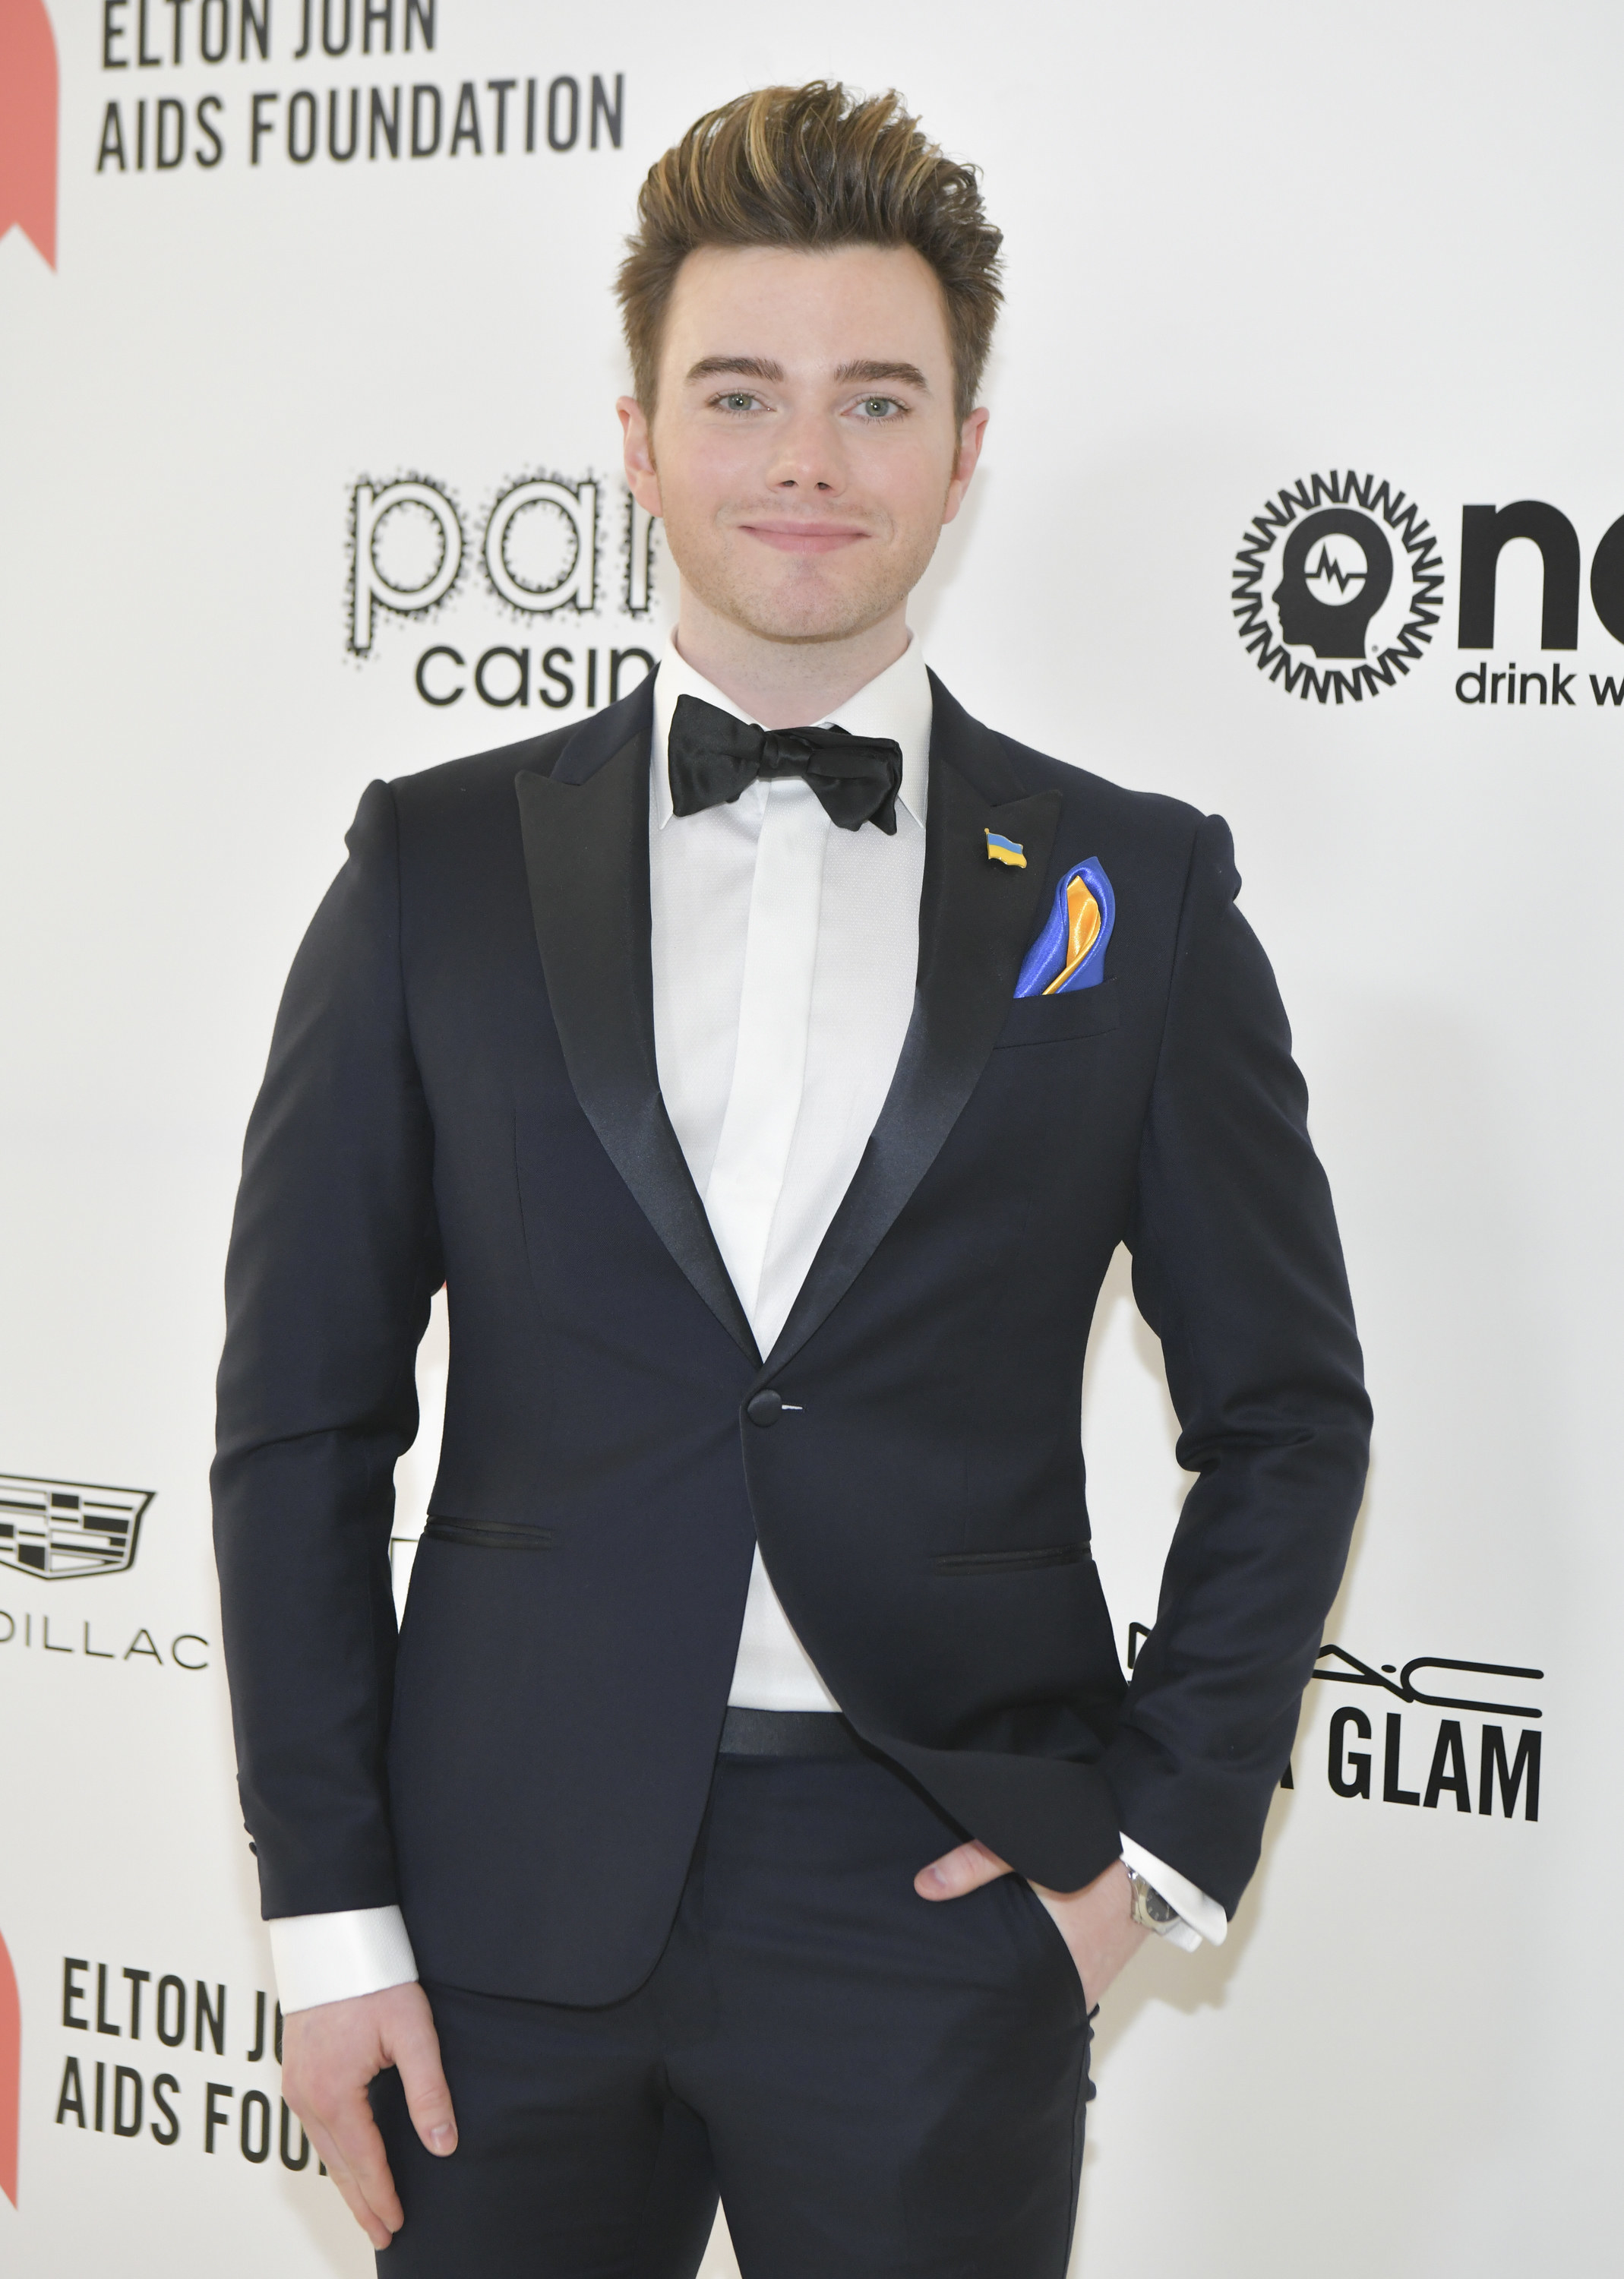 Chris in a suit and bow tie